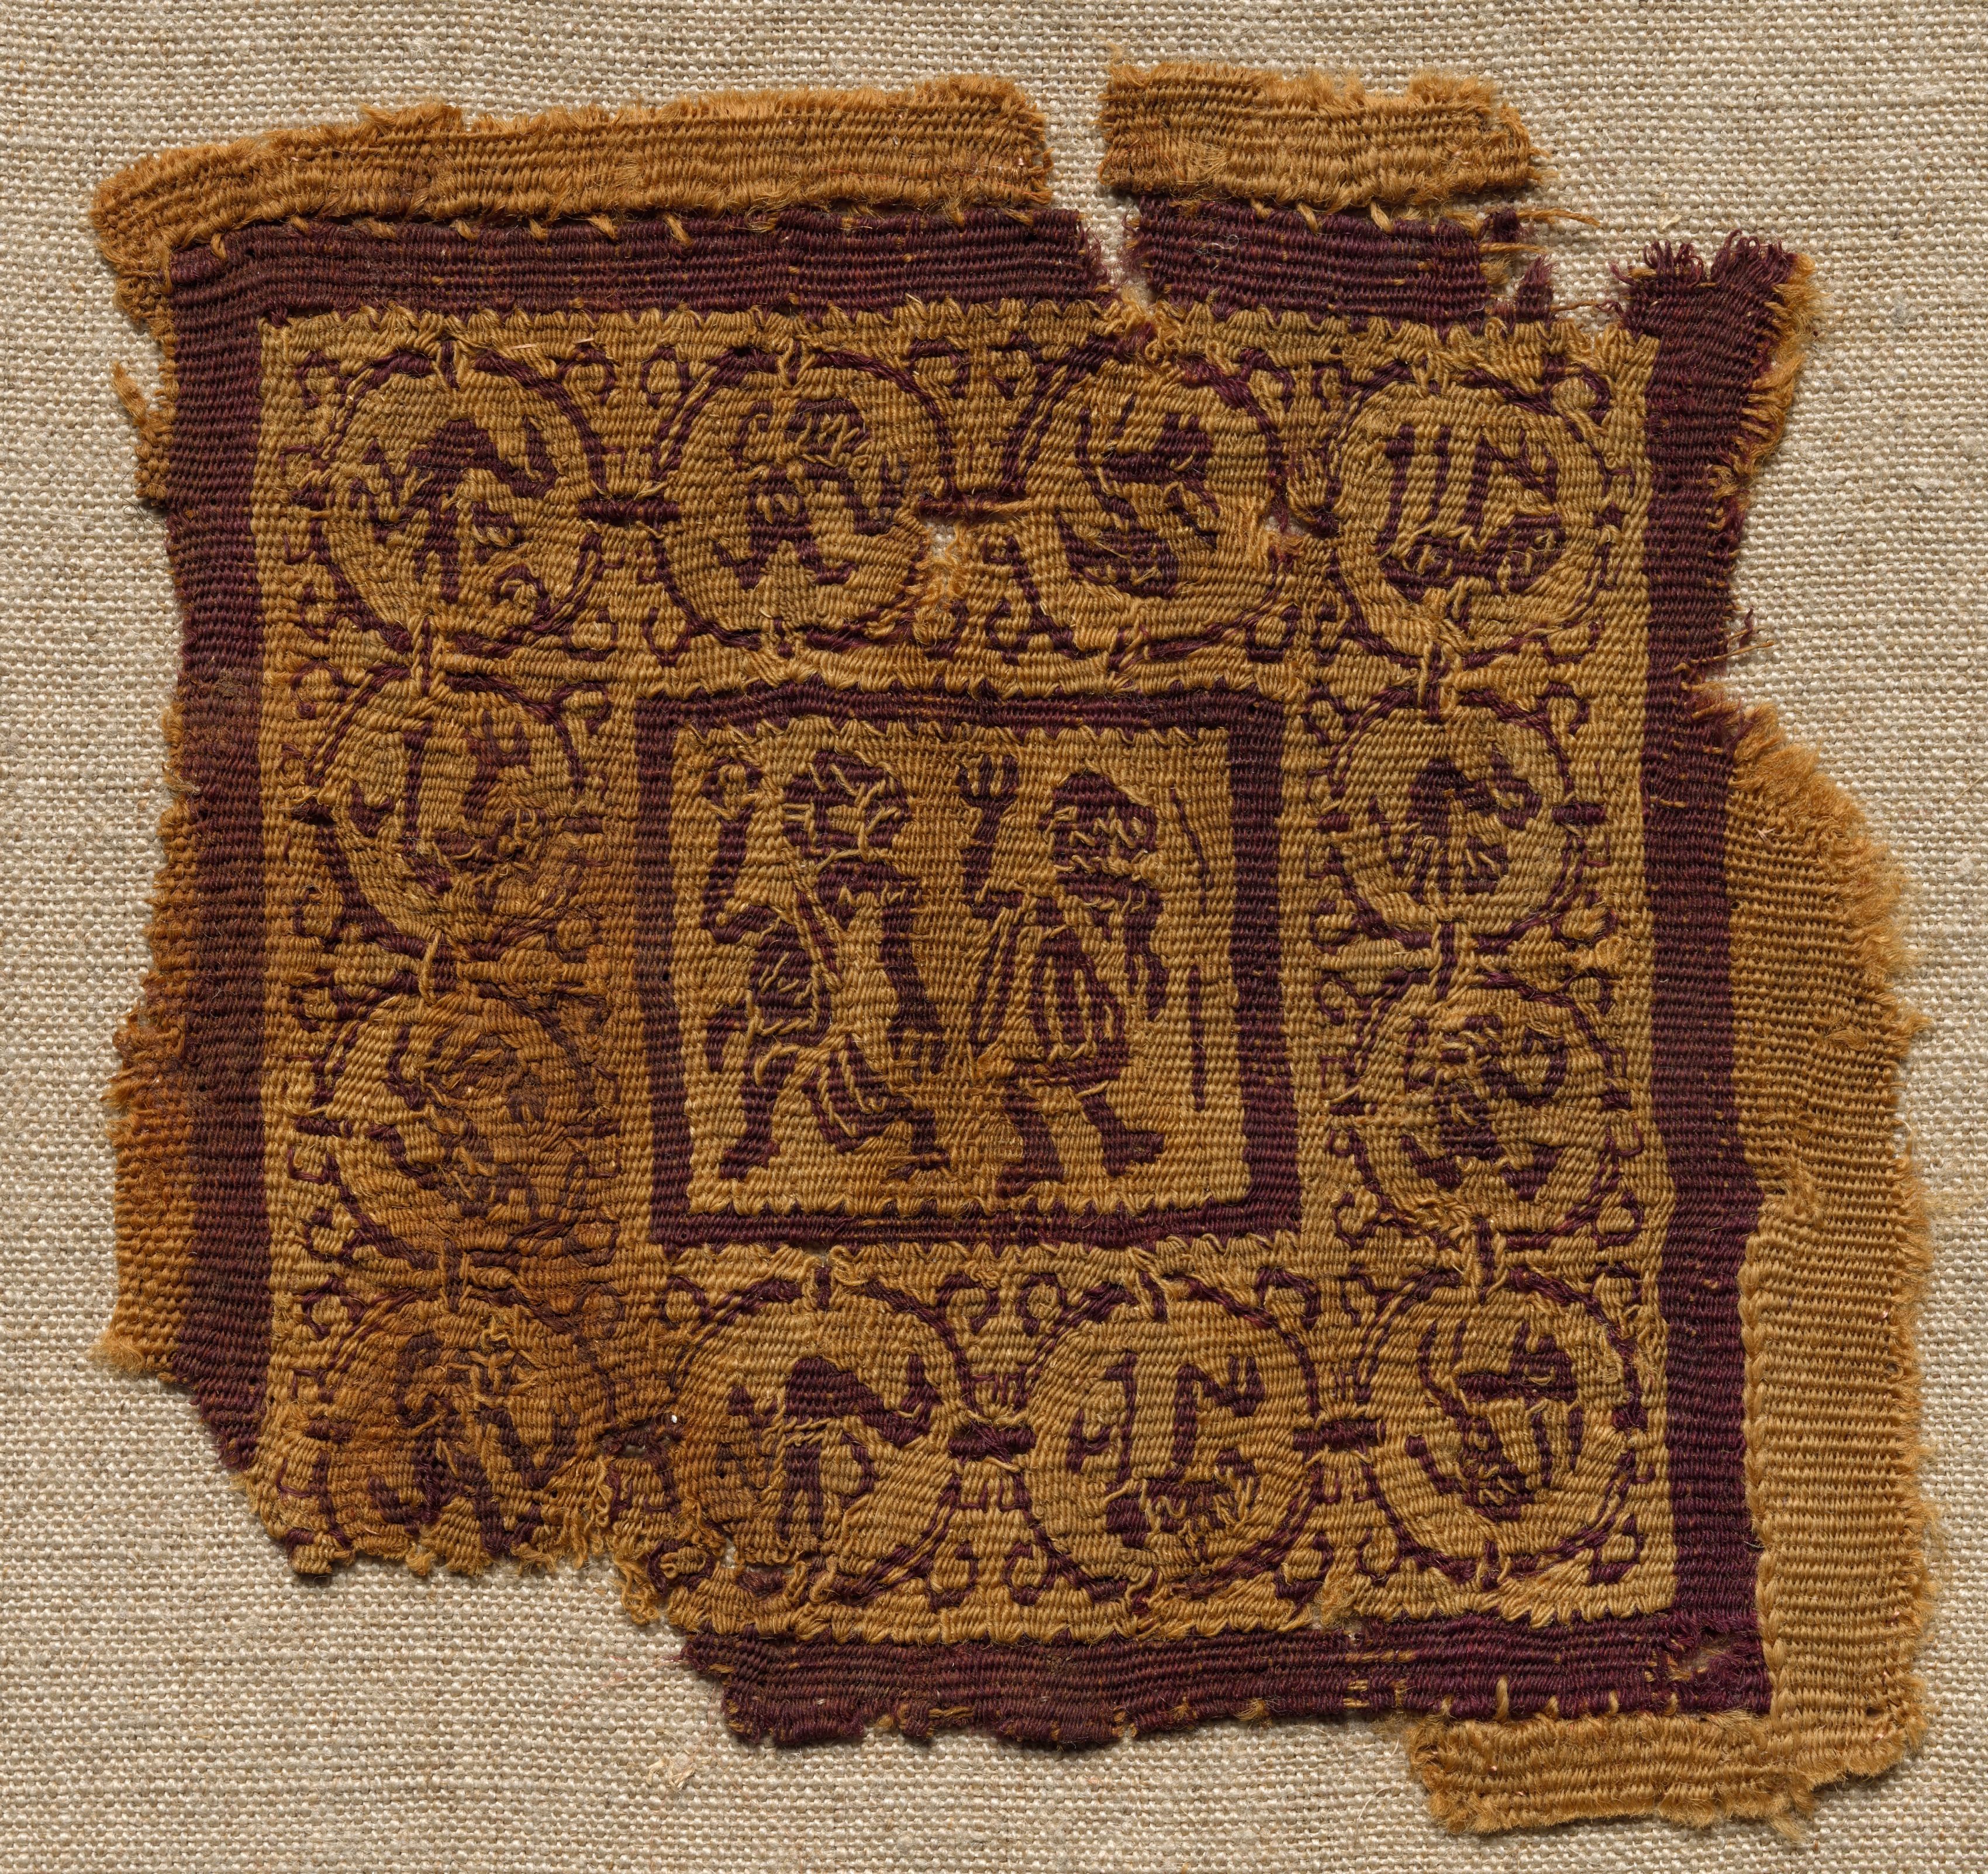 Fragment, with a Segmentum, from a Tunic